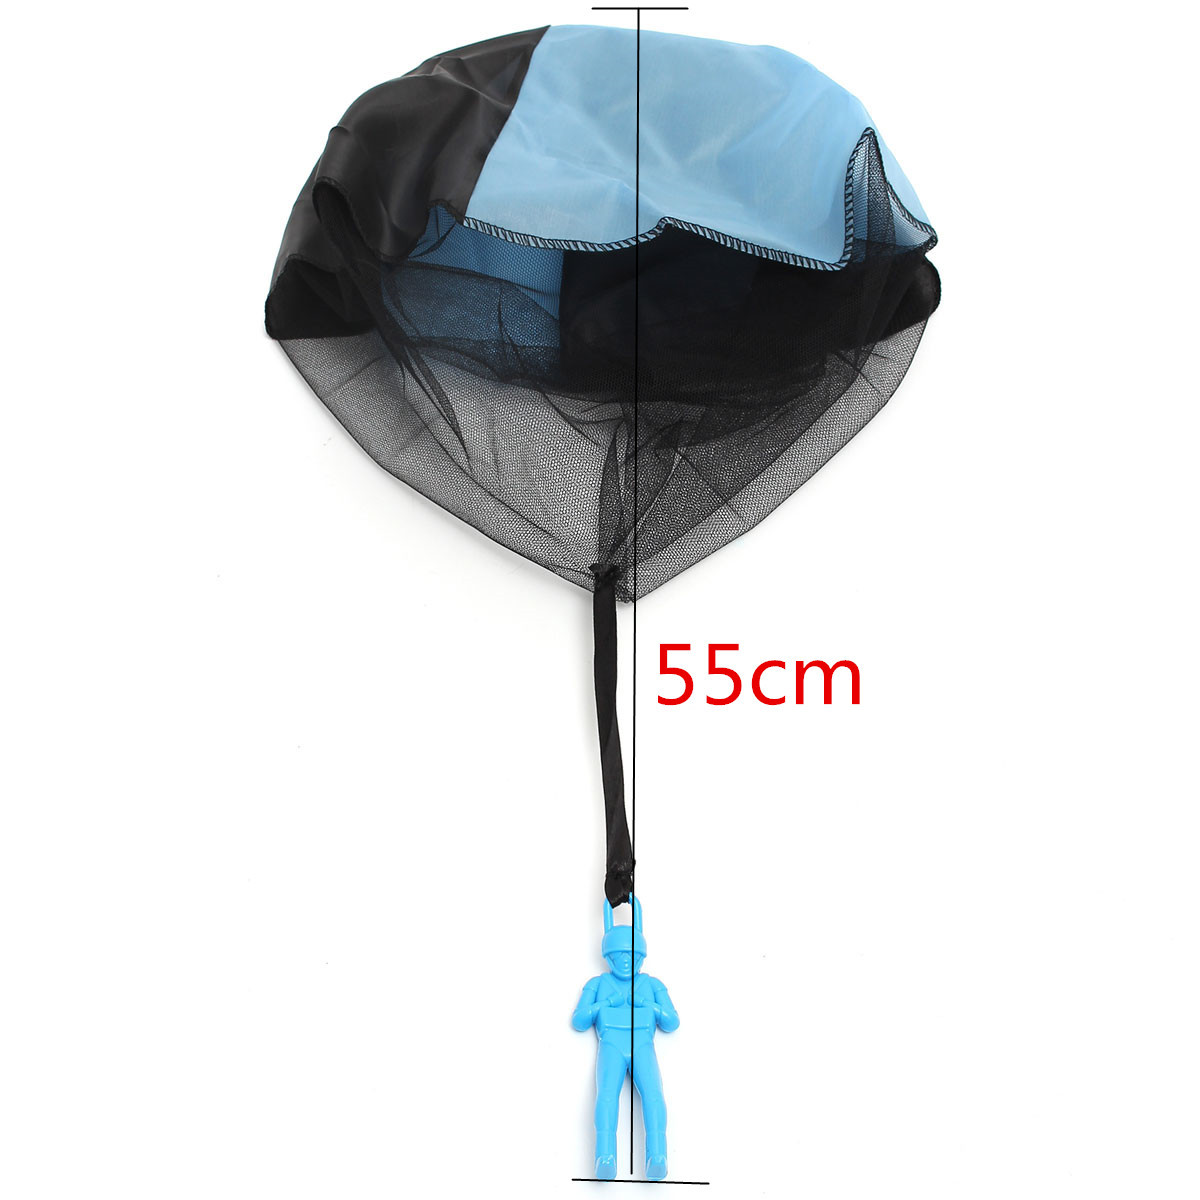 Kids-Hand-Throwing-Parachute-Kite-Outdoor-Play-Game-Toy-1021887-8